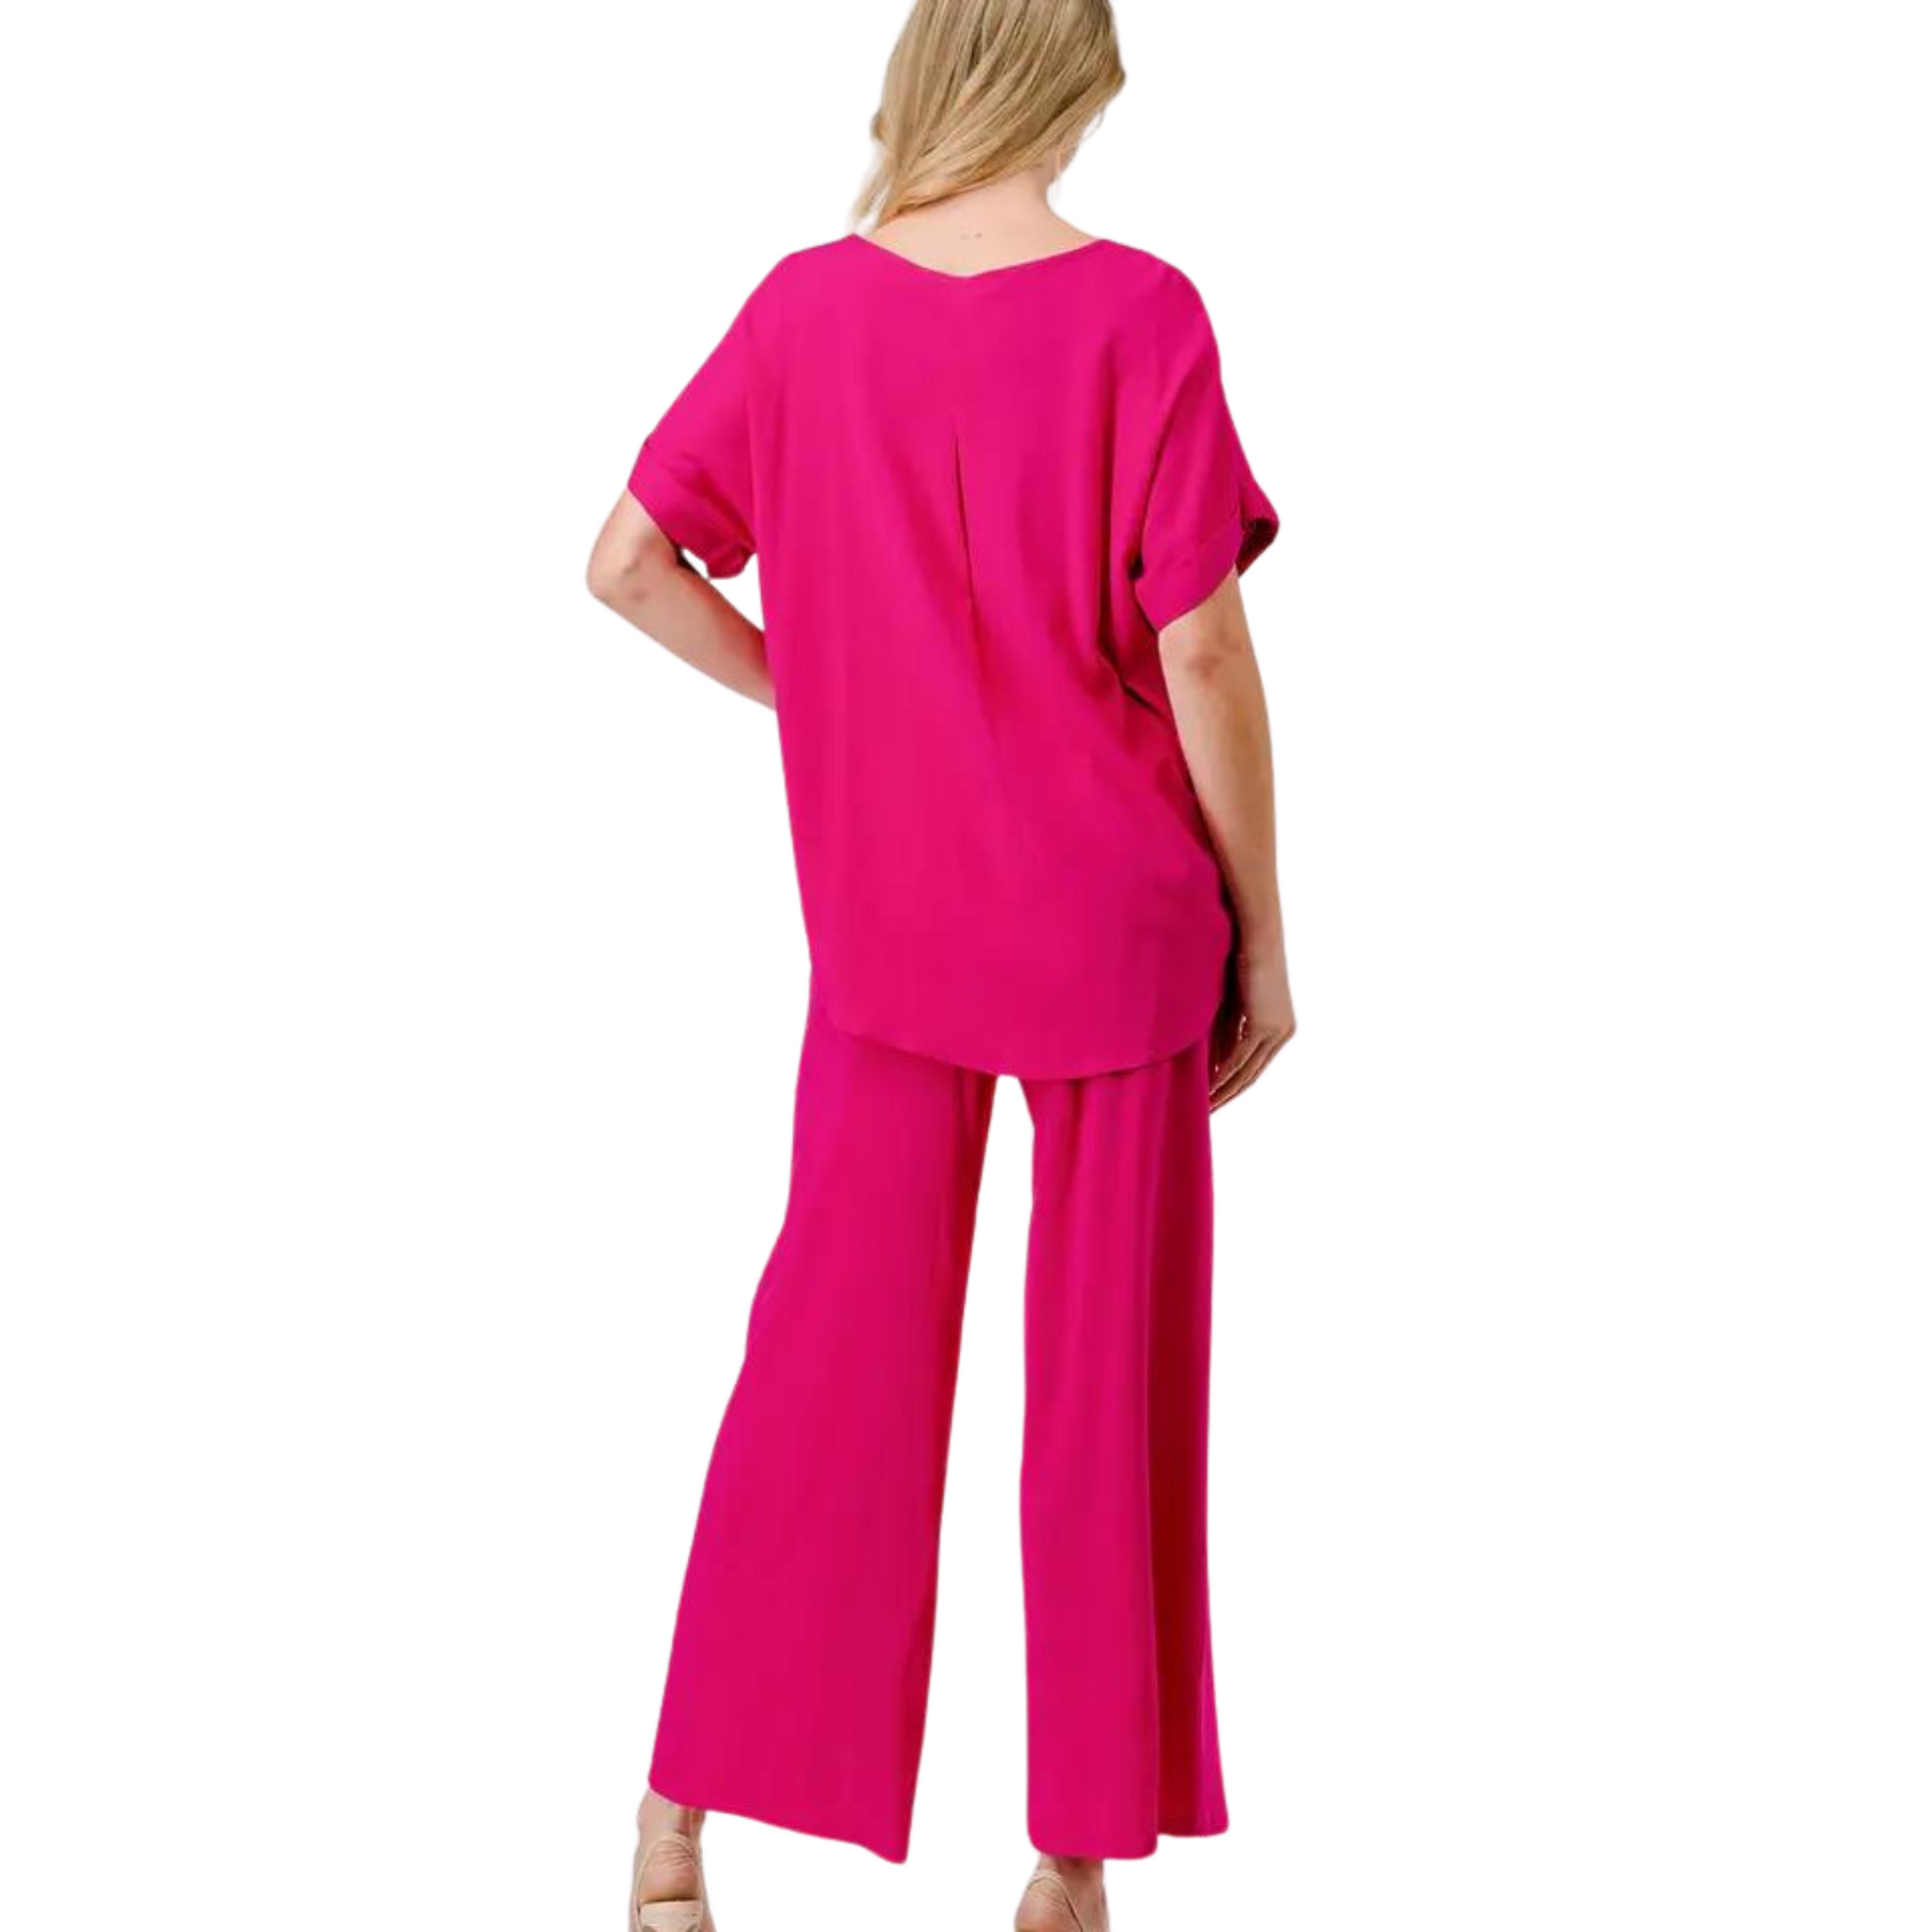 Crafted with a feminine fuchsia hue, this loose fit top and bottom set is the ultimate complete outfit. The short sleeve top and wide leg bottoms provide comfort and versatility, perfect for any occasion.